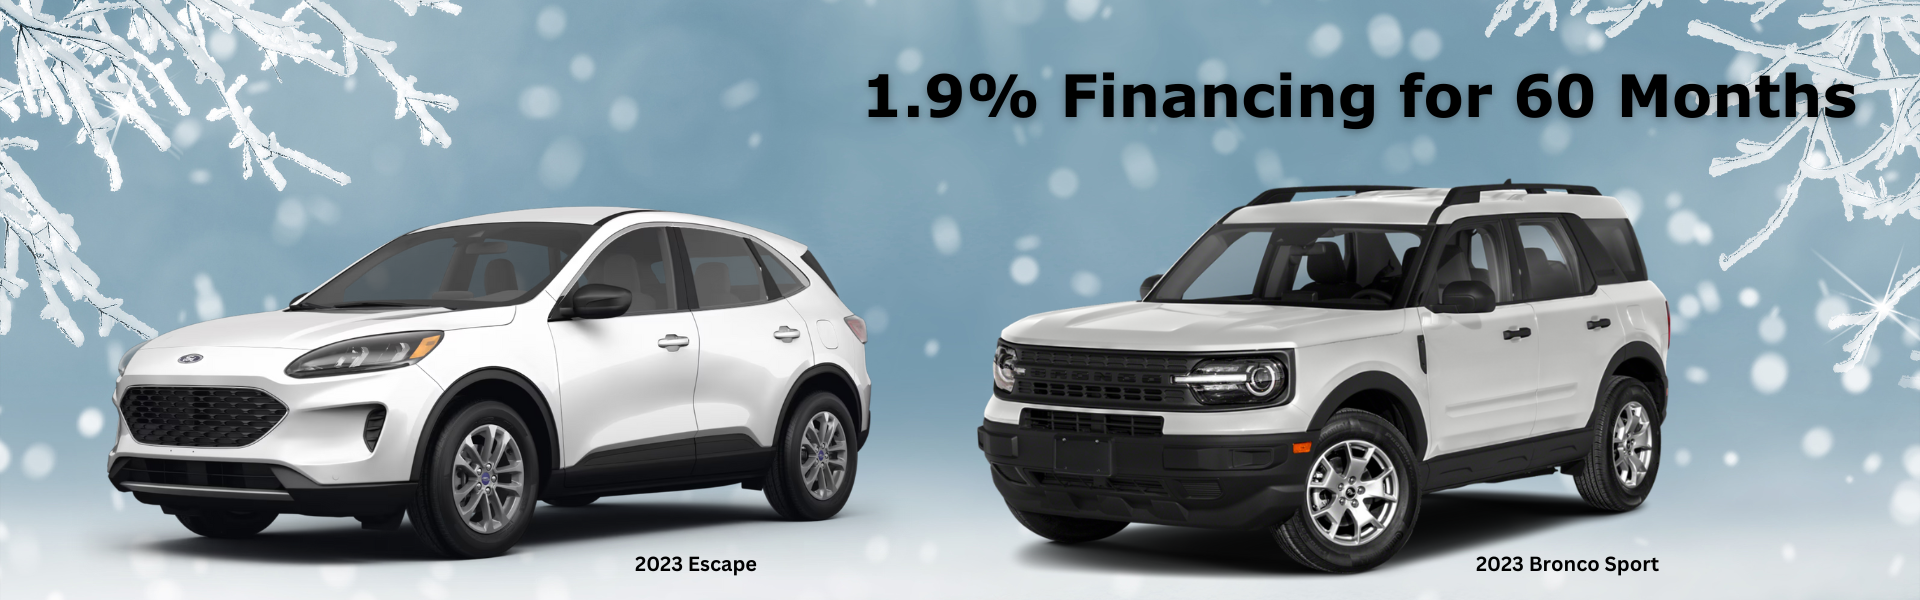 Ford Escape and Bronco Sport 1.9% special